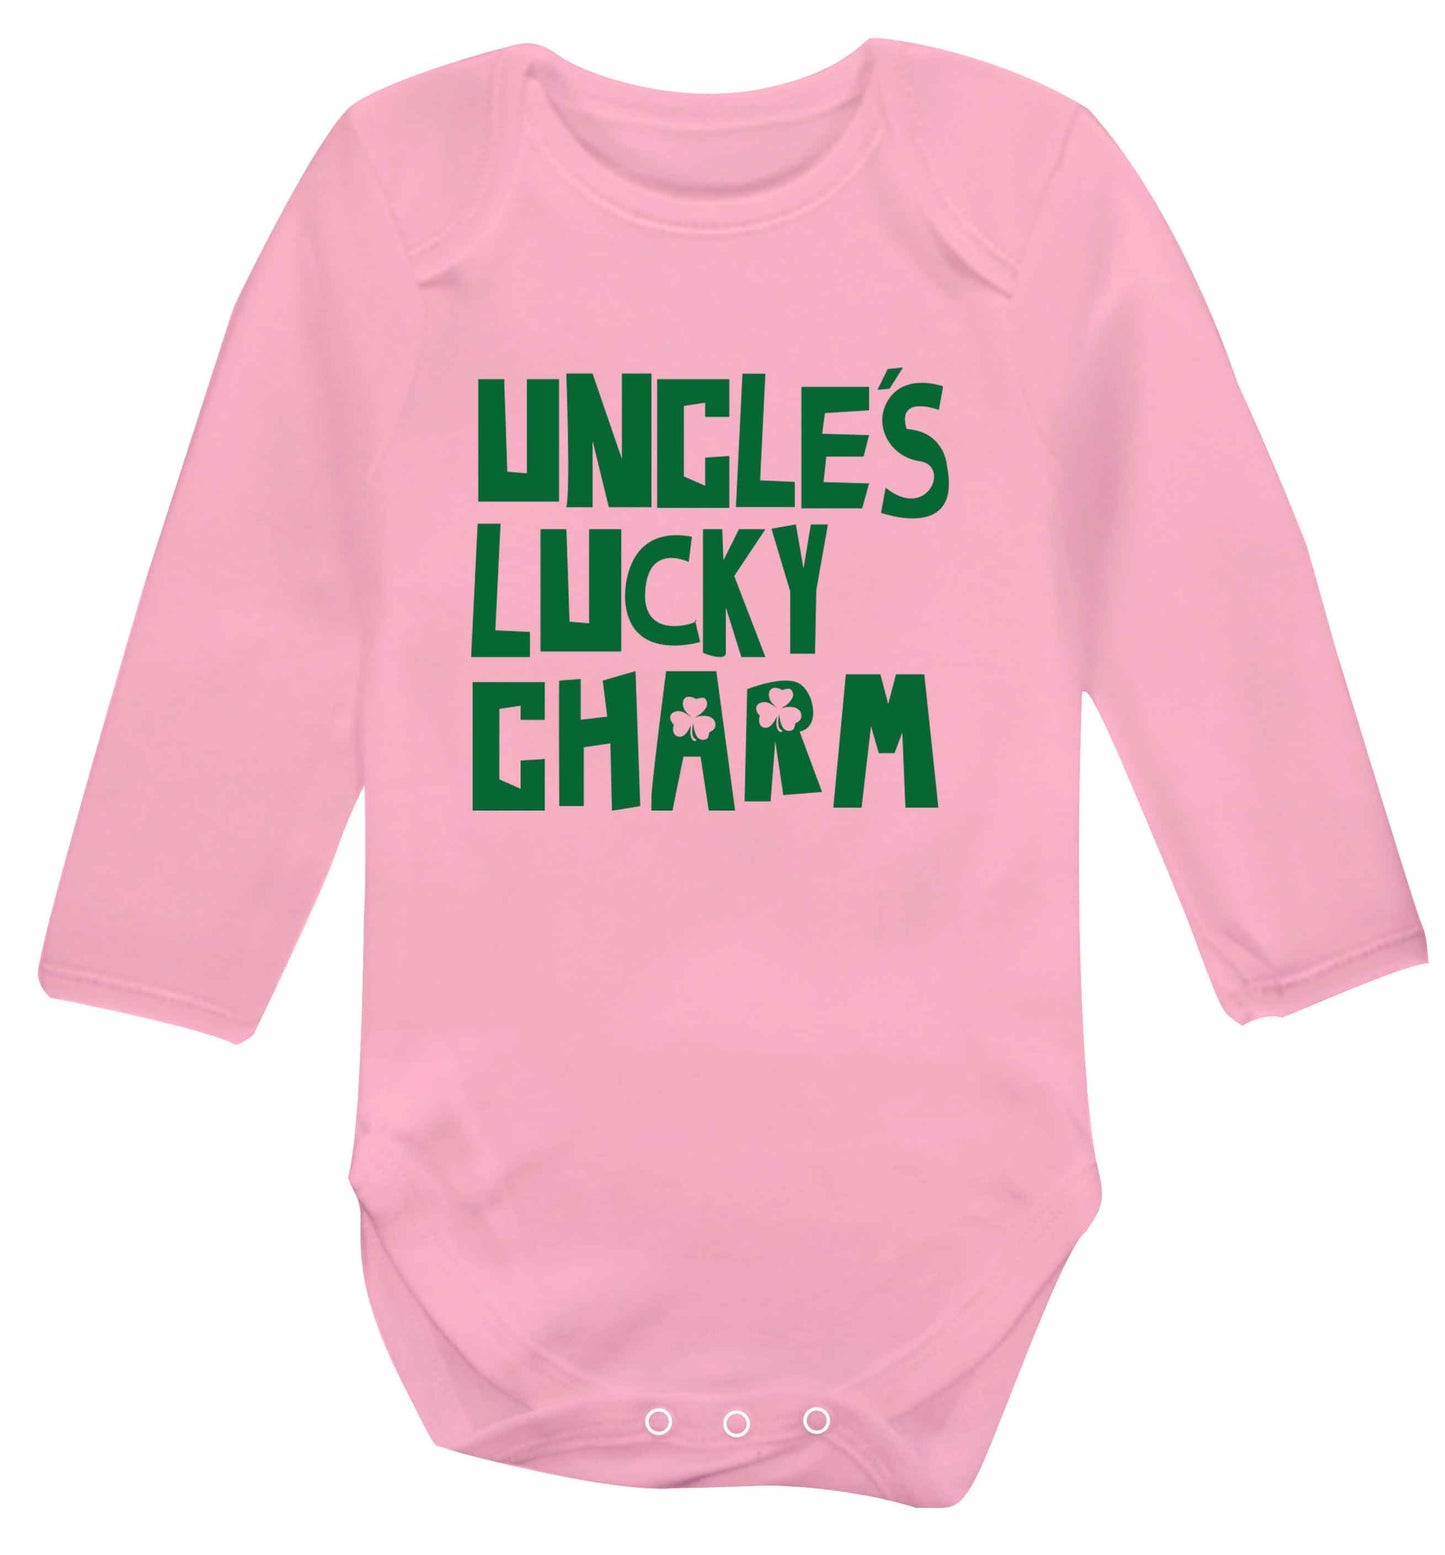 Uncles lucky charm baby vest long sleeved pale pink 6-12 months